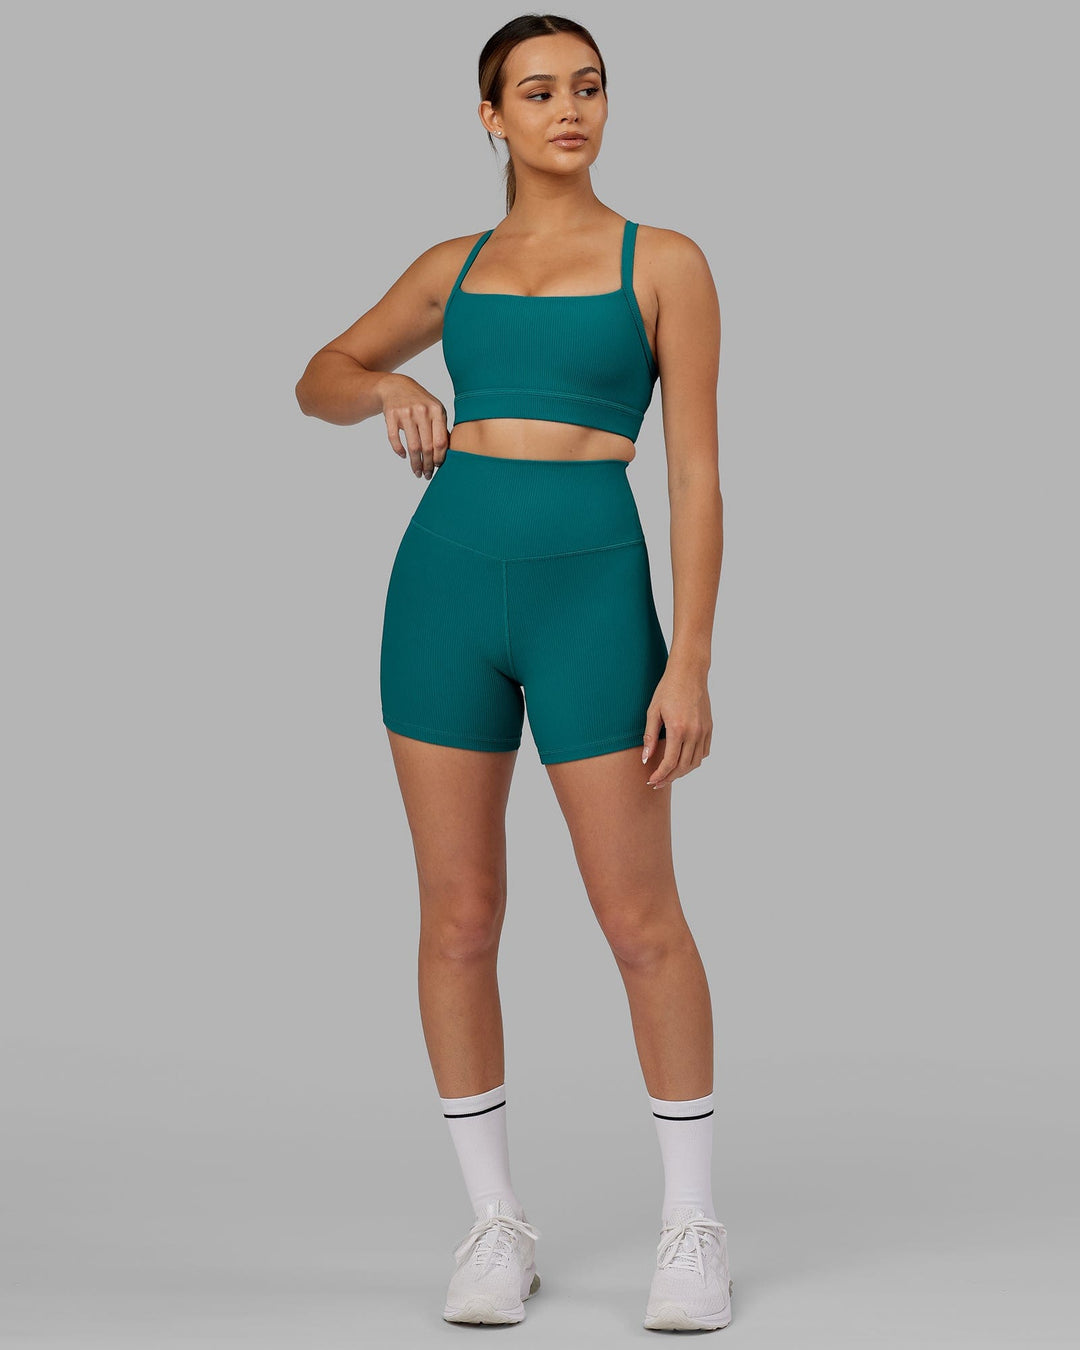 Woman Wearing Products Strike Ribbed X-Short Tights - Sea Green